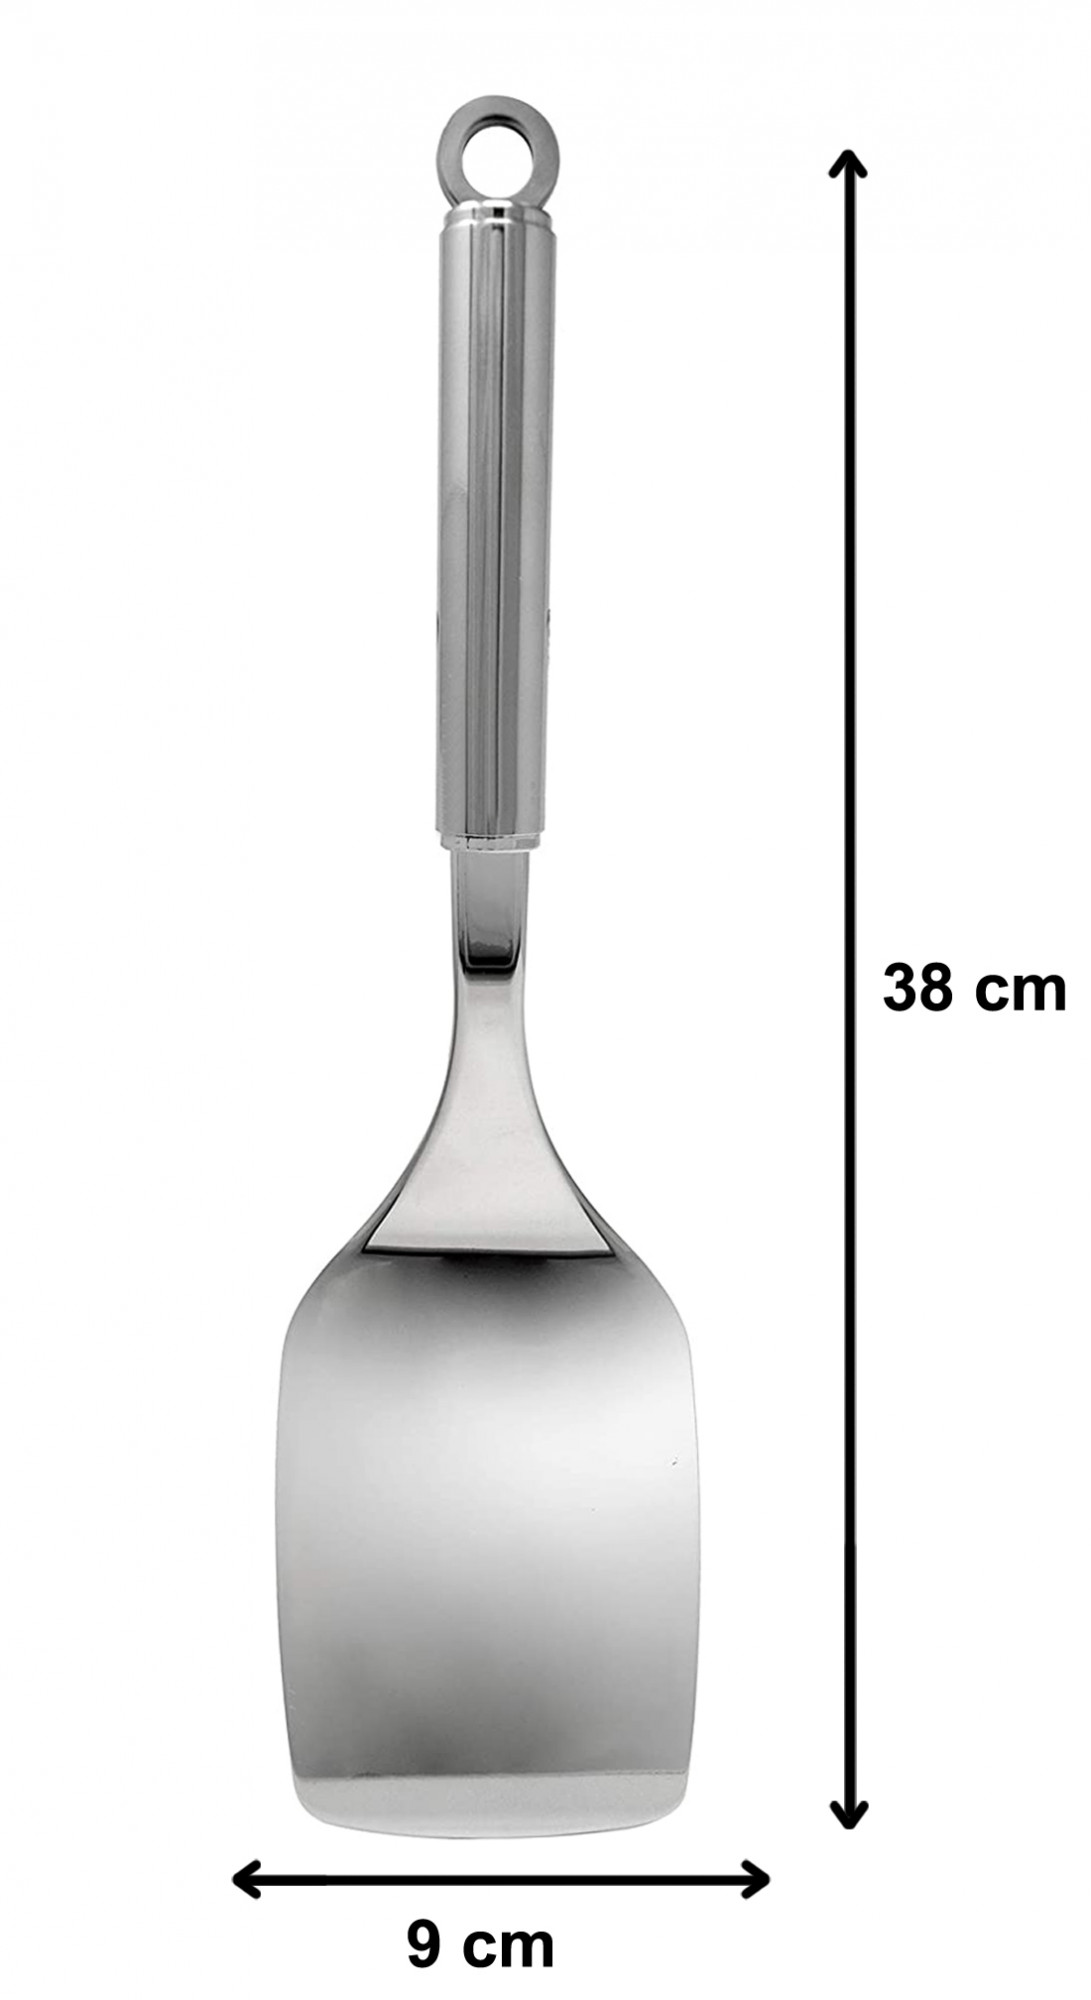 Kuber Industries Stainless Steel Kitchen Utensil Set of 2 (Slotted Turner & Spatula) Cooking Utensils - Nonstick Kitchen Utensils Cookware Set Best Kitchen Gadgets Kitchen Tool Set Gift (Silver)